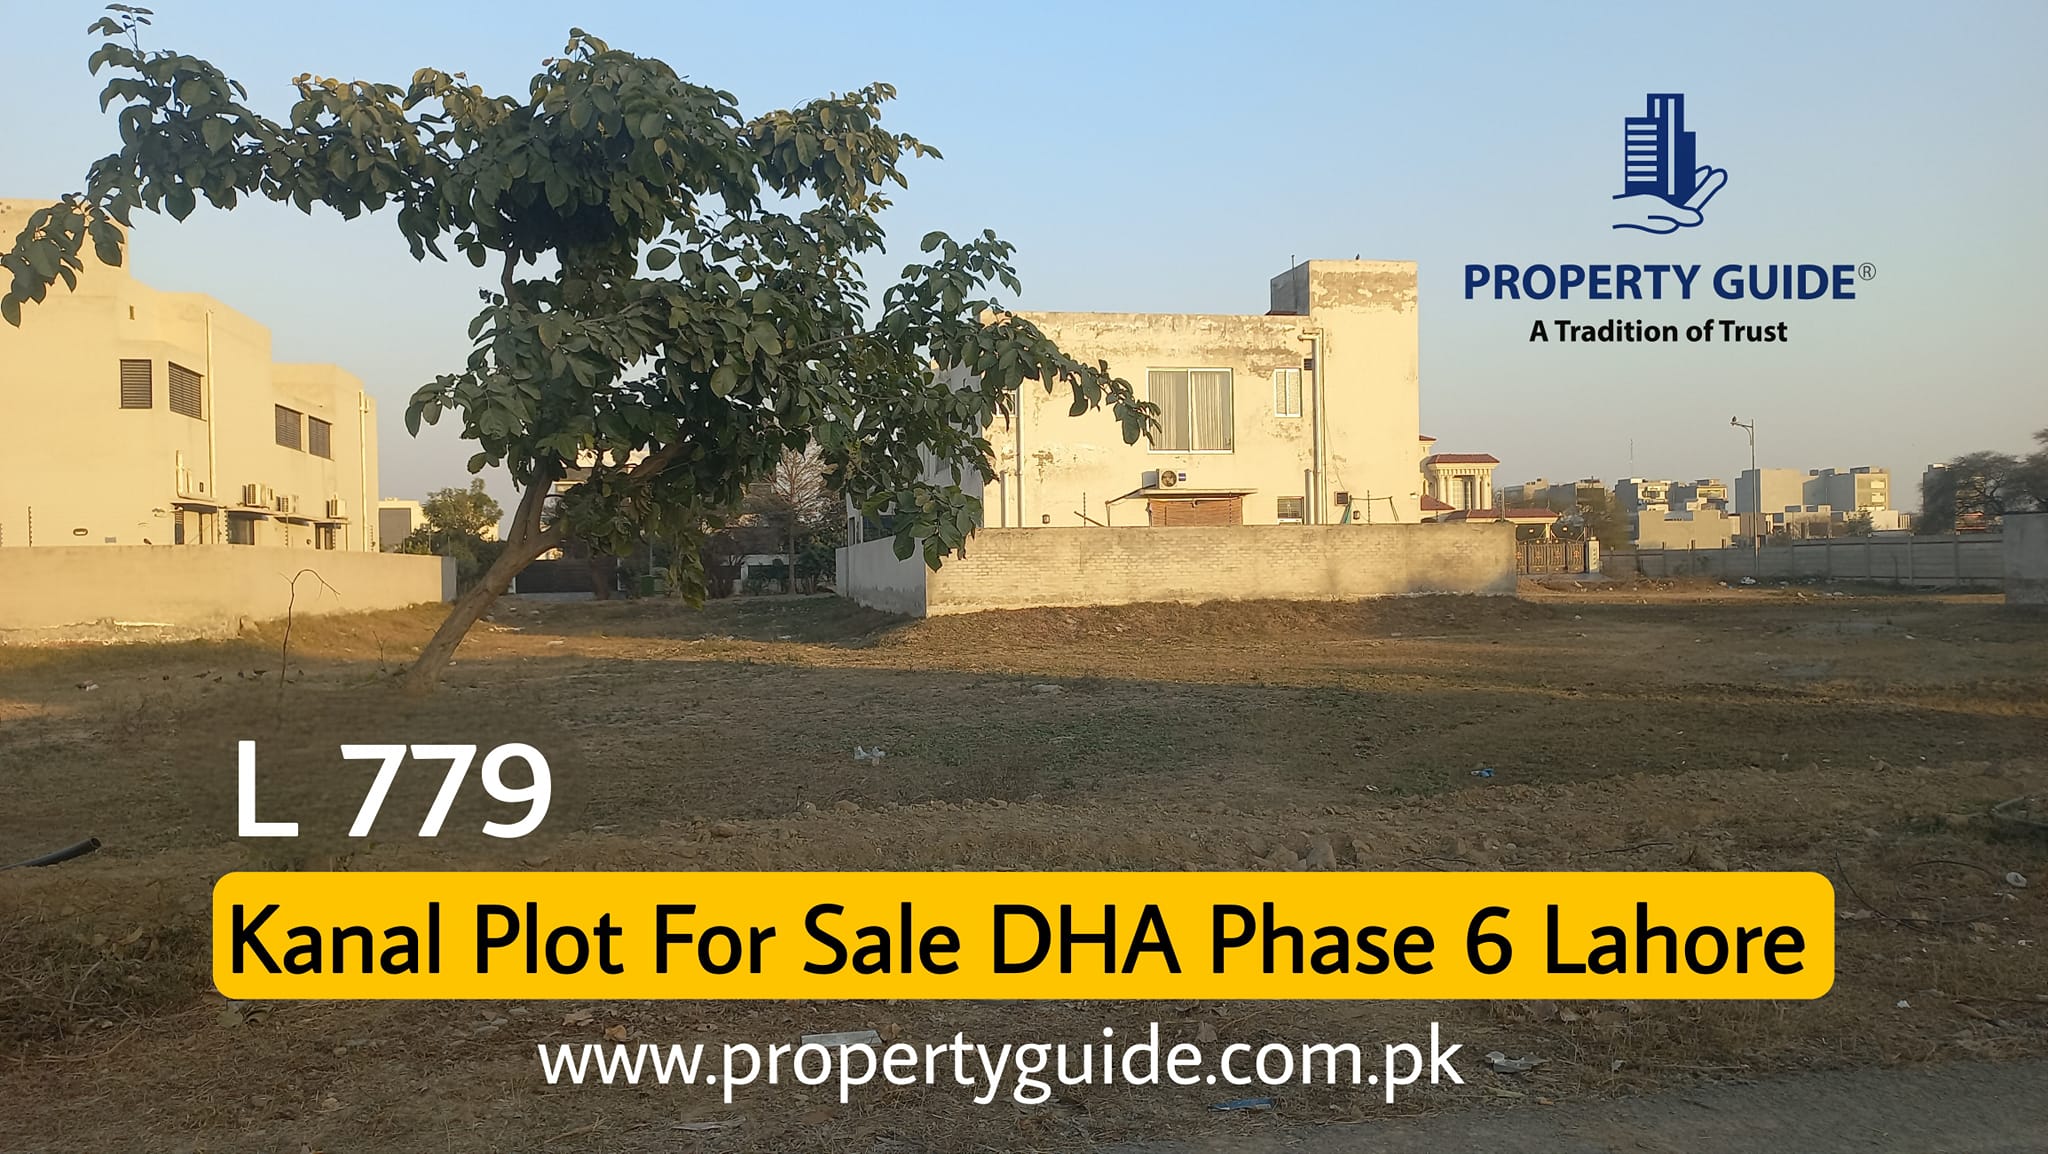 Kanal Plot For Sale 779 L Block DHA Phase 6 Lahore